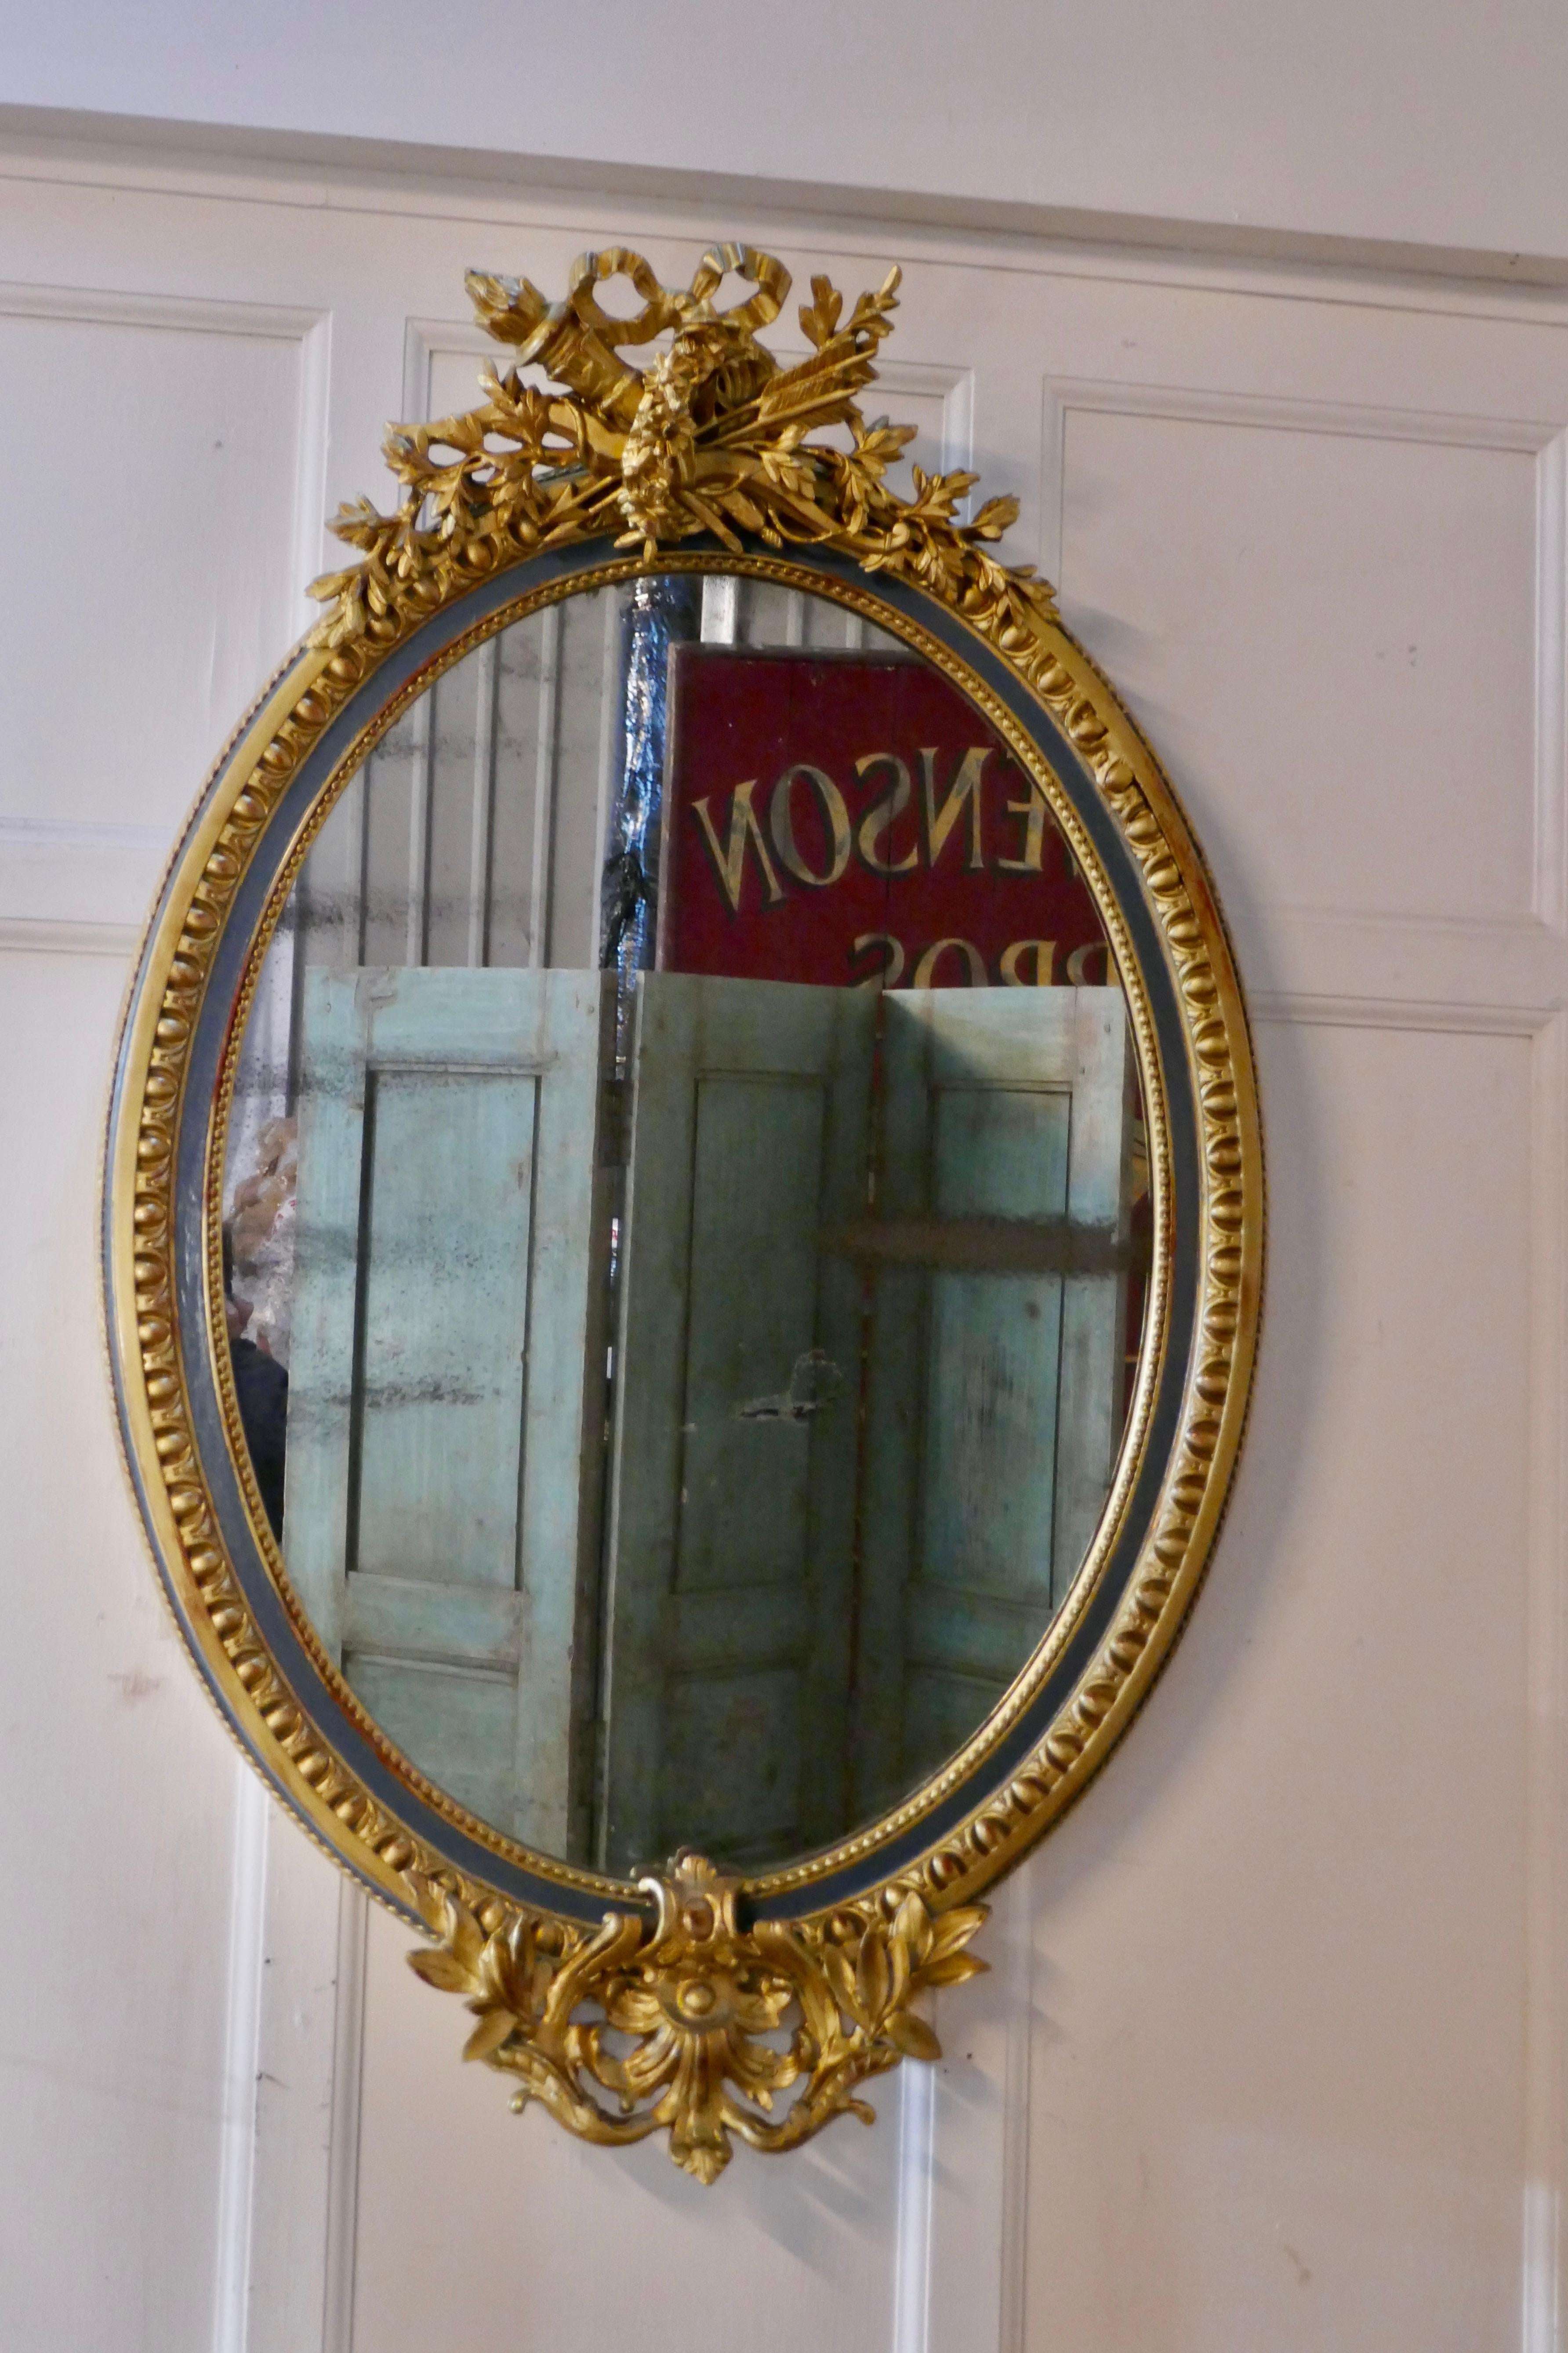 A large French Rococo oval gilt wall mirror

The mirror has an exquisite gilt frame in the Rococo style, it is decorated with arrows and quiver, and many flowers and leaves with an attractive patterned border. In the border there are 2 bands of